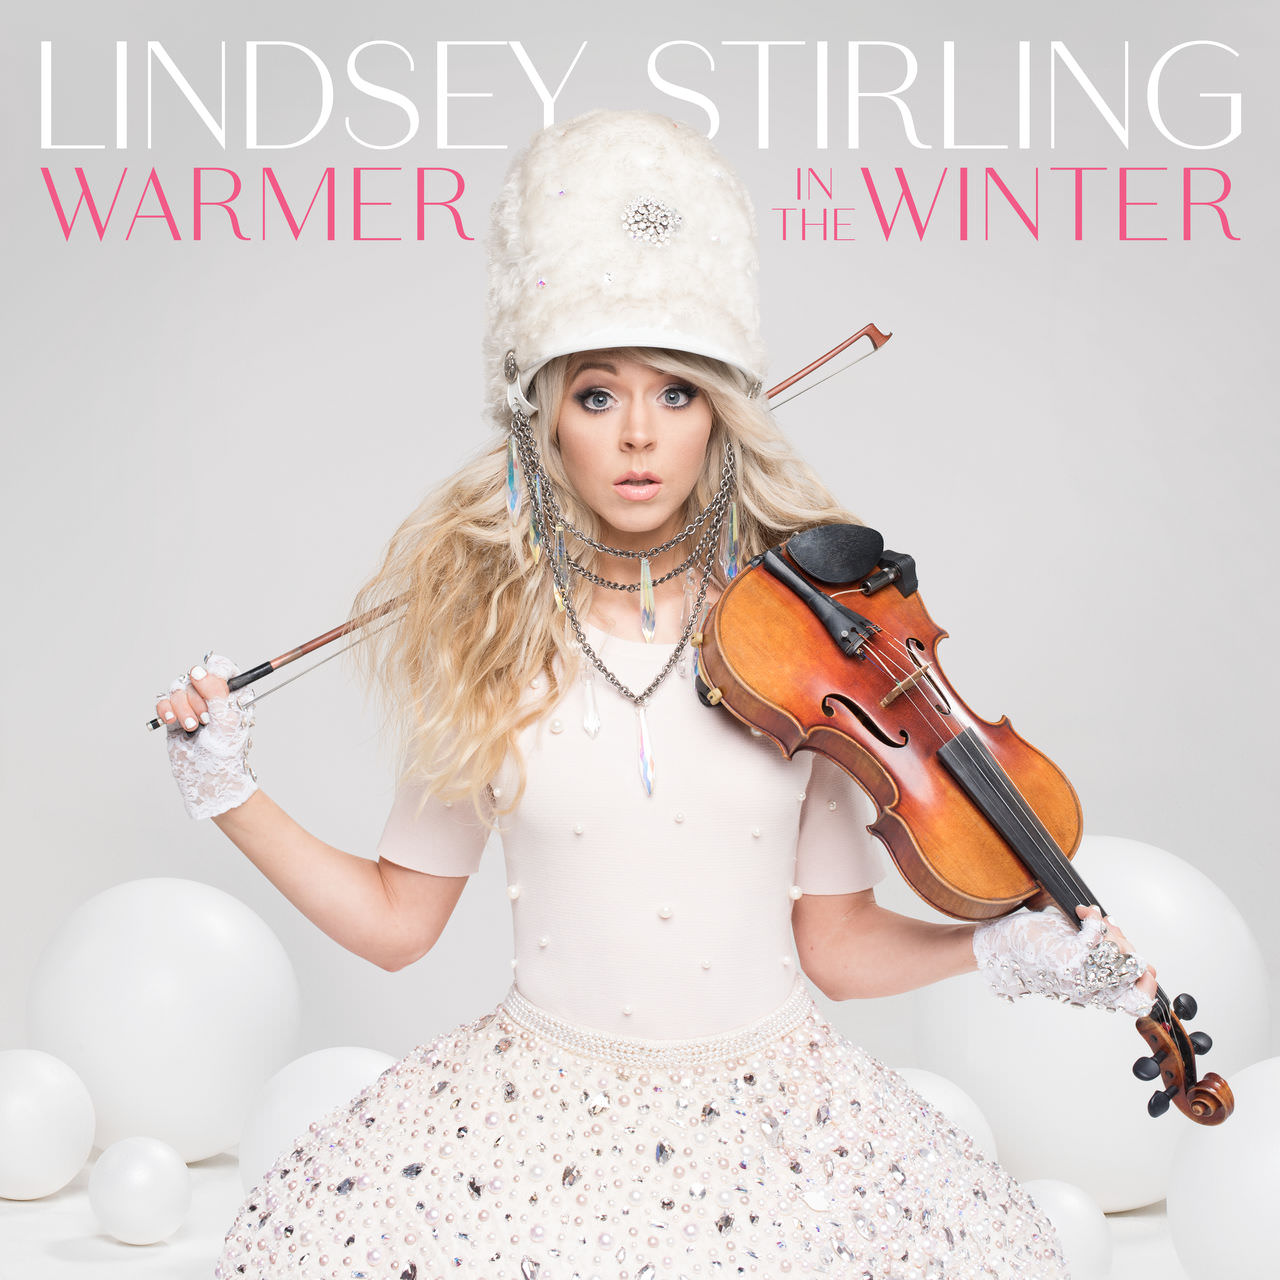 Lindsey Stirling - Warmer In The Winter {Deluxe Version} (2017) [Qobuz FLAC 24bit/48kHz]